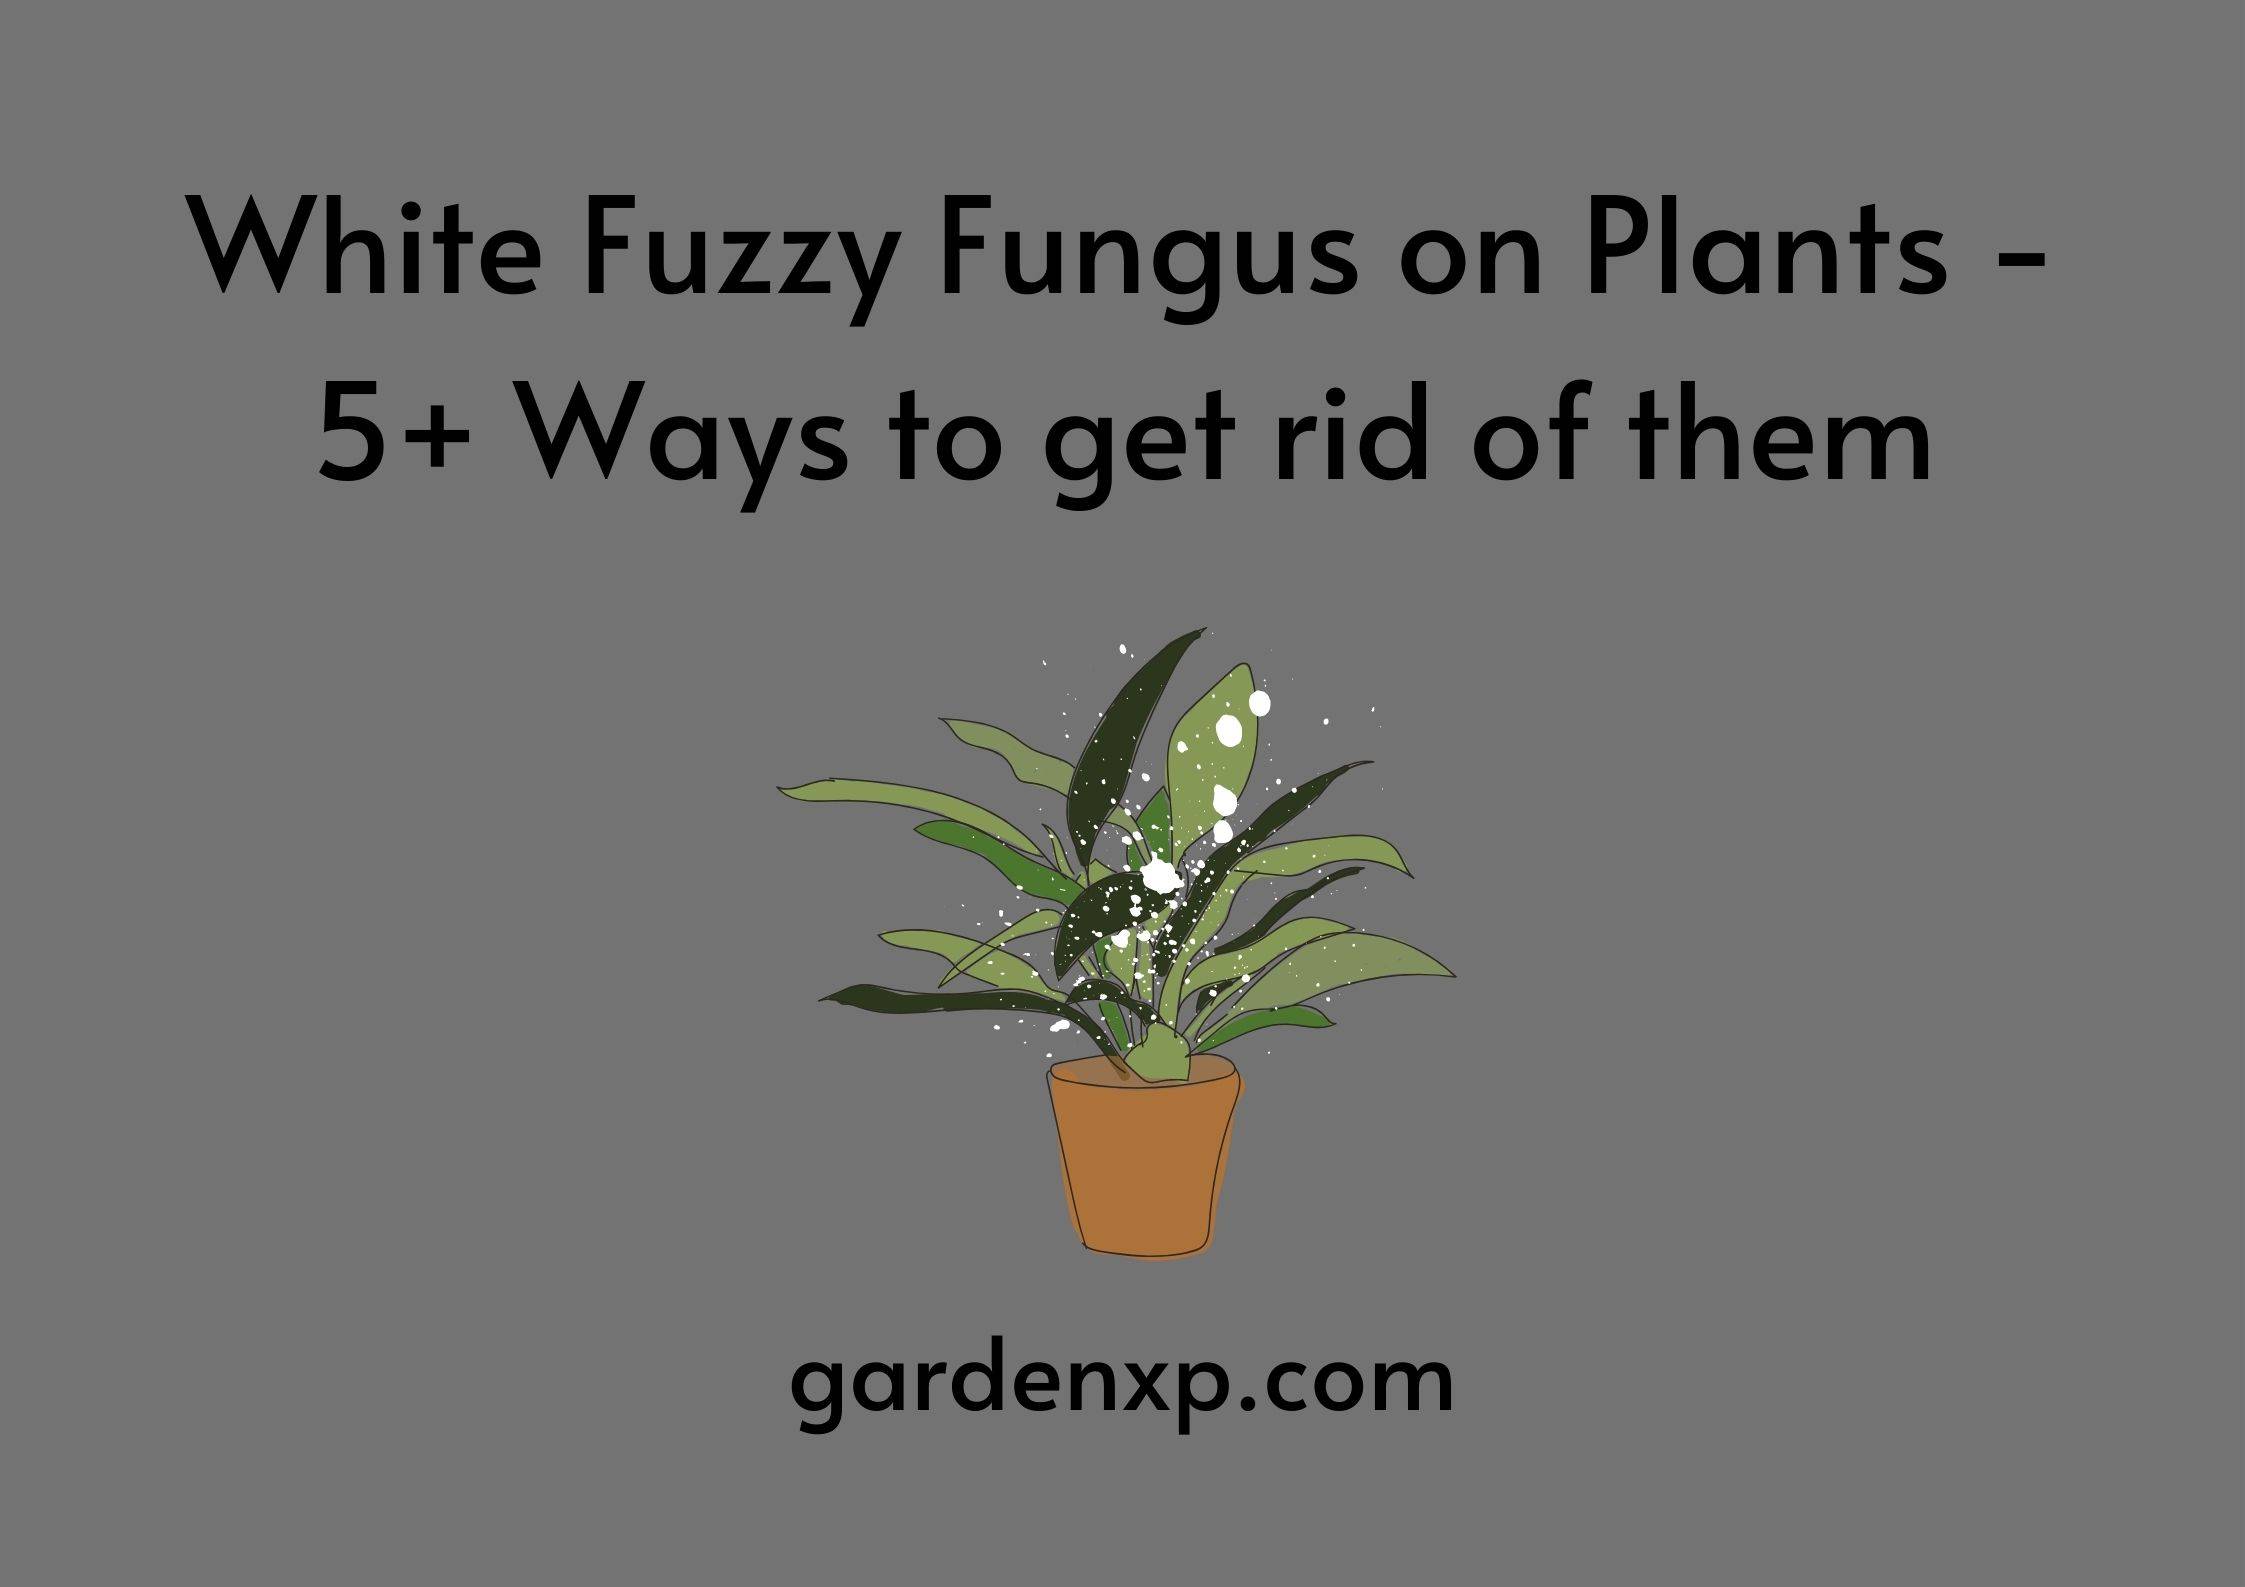 White Fuzzy Fungus on Plants - 5+ Ways to get rid of them